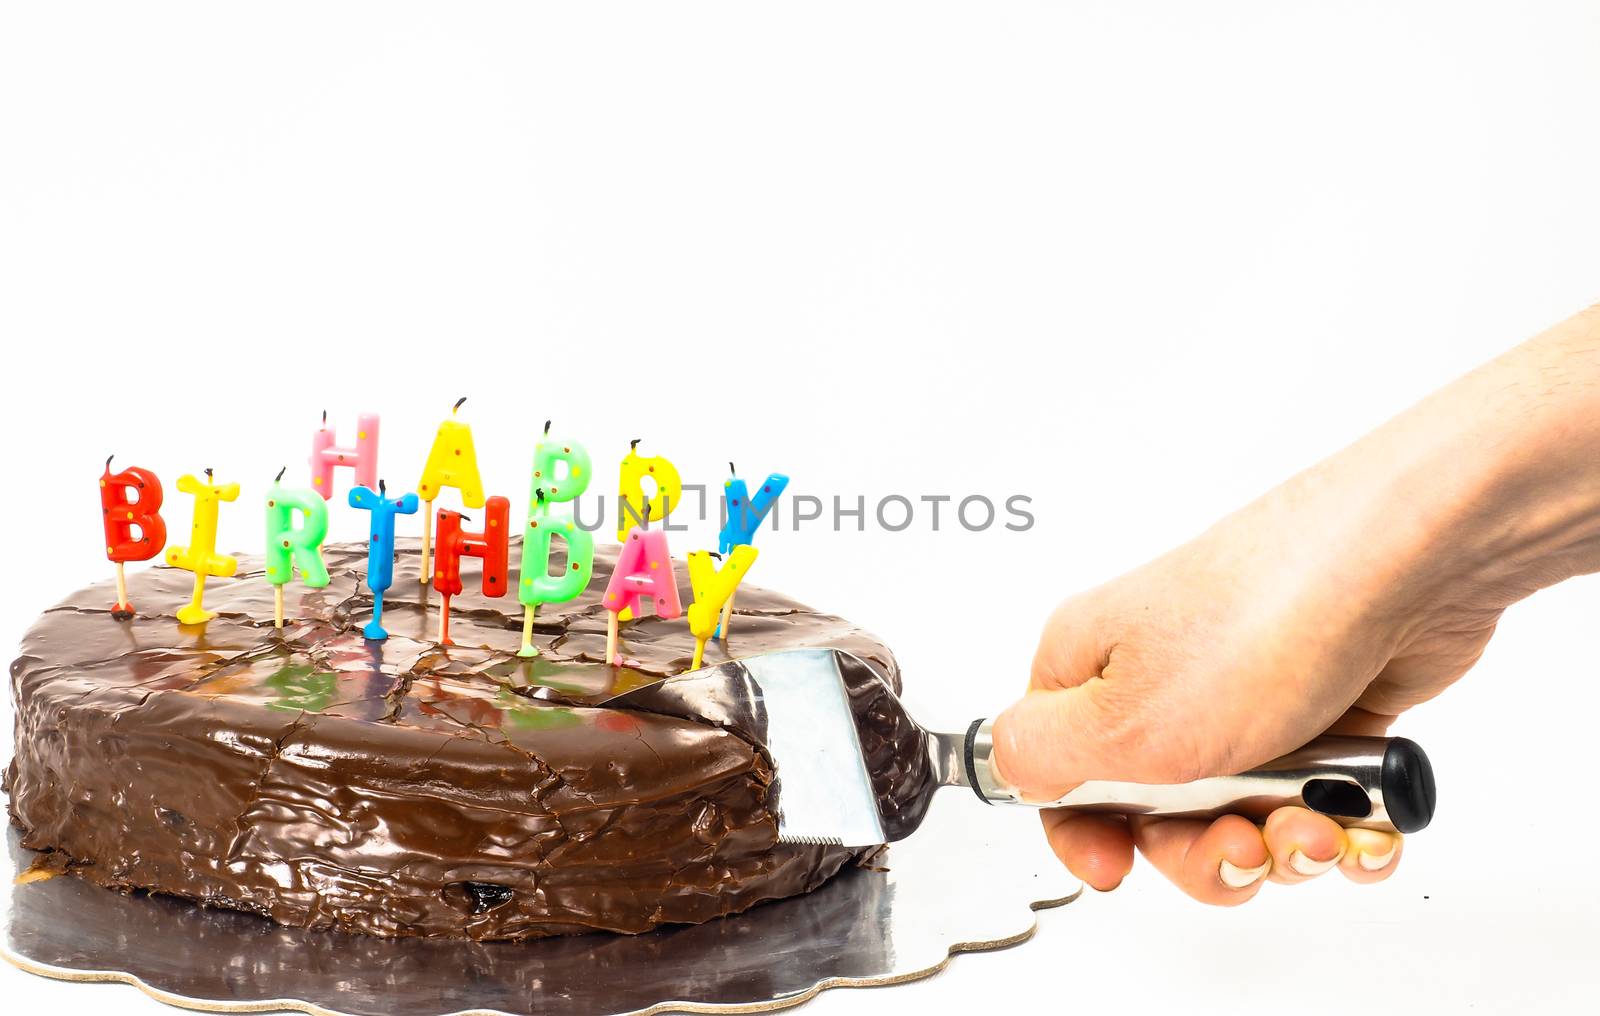 Female person cutting a homemade sacher chocolate cake with birt by Arvebettum